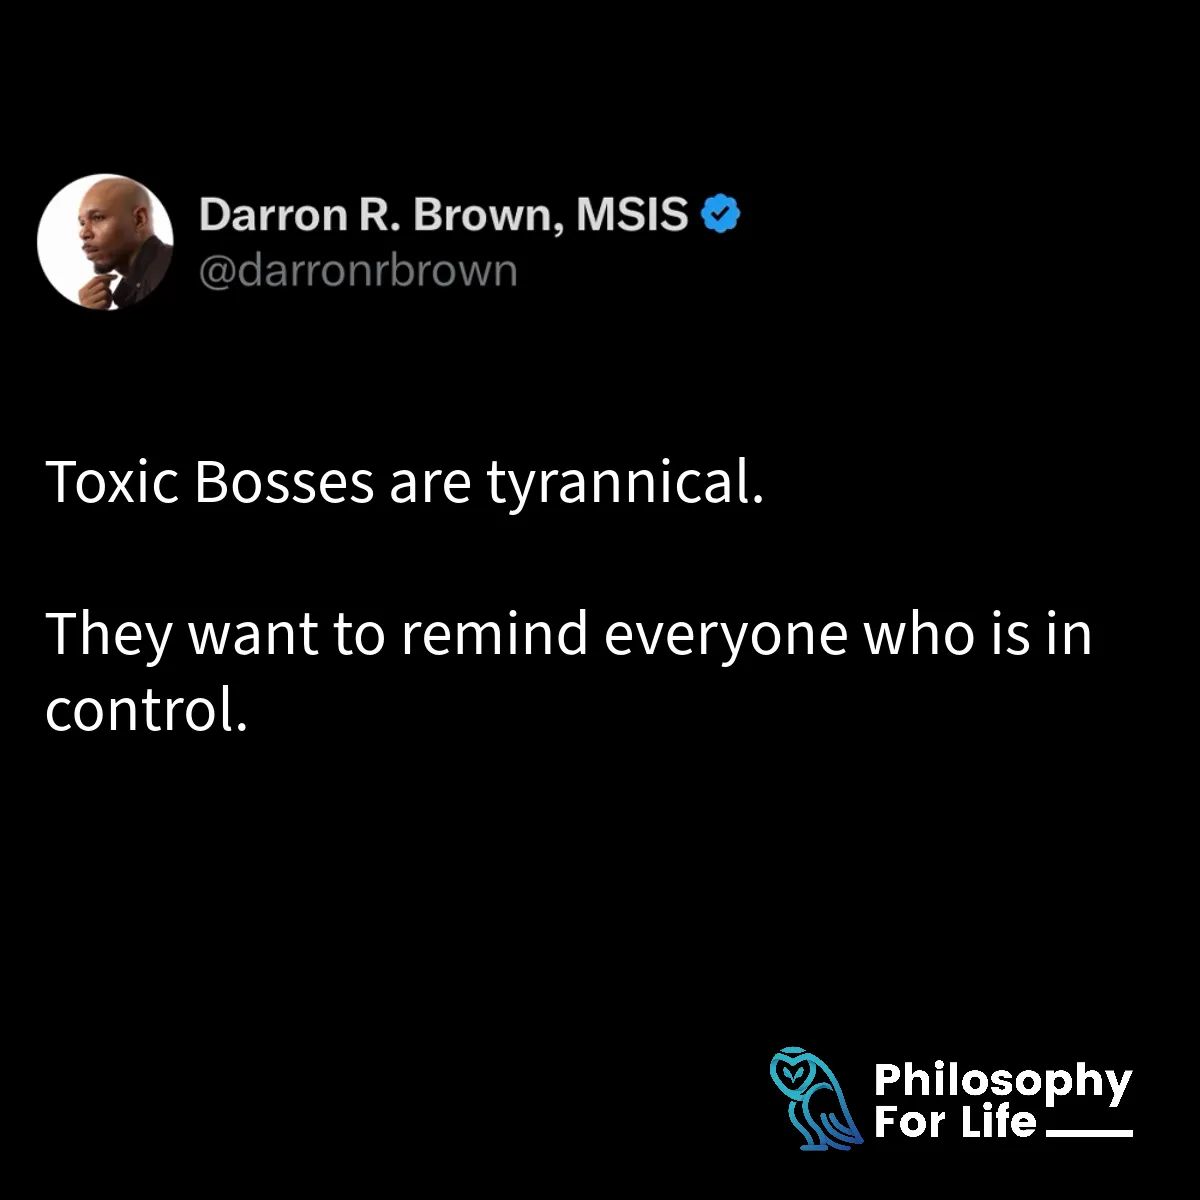 ⛔️ Say No to Toxic Bosses ⛔️ 

A toxic boss not only hampers individual growth but can also create a culture of fear and disengagement within the organization. 

#ToxicBosses #Leadership #WorkCulture #ProfessionalGrowth #PositiveChange #HealthyWorkEnvironment